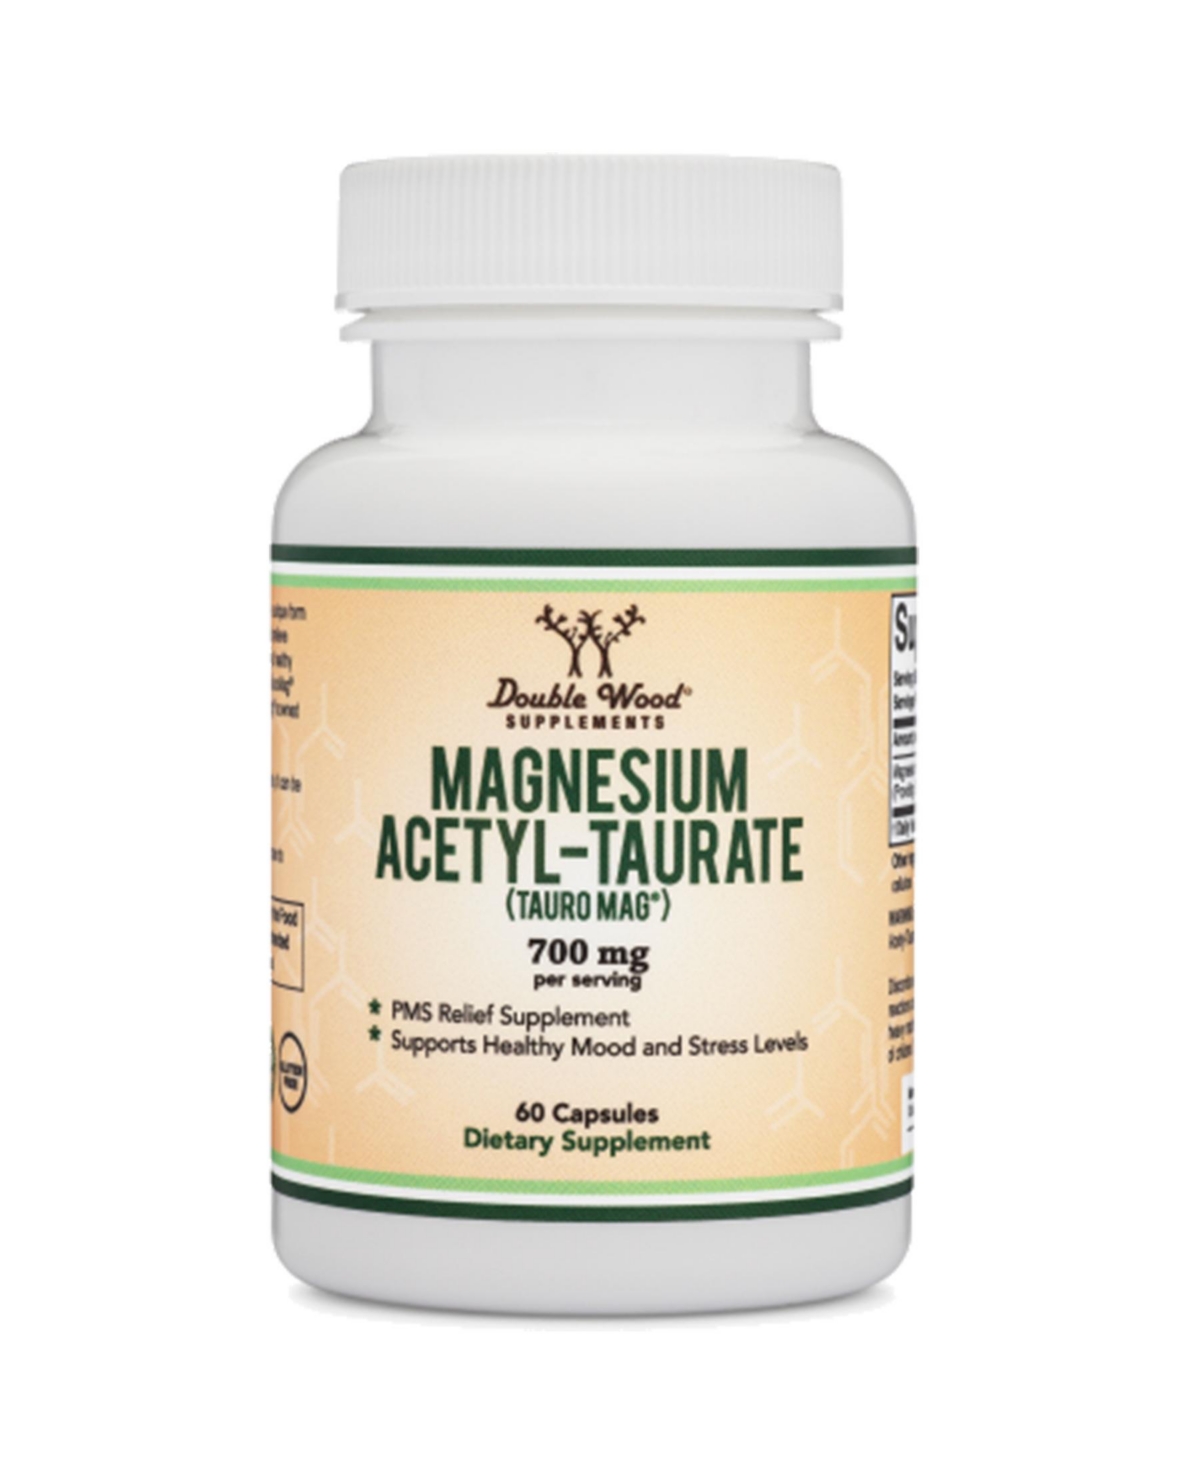 Magnesium Acetyl-Taurate (Tauromag) - 700 mg servings